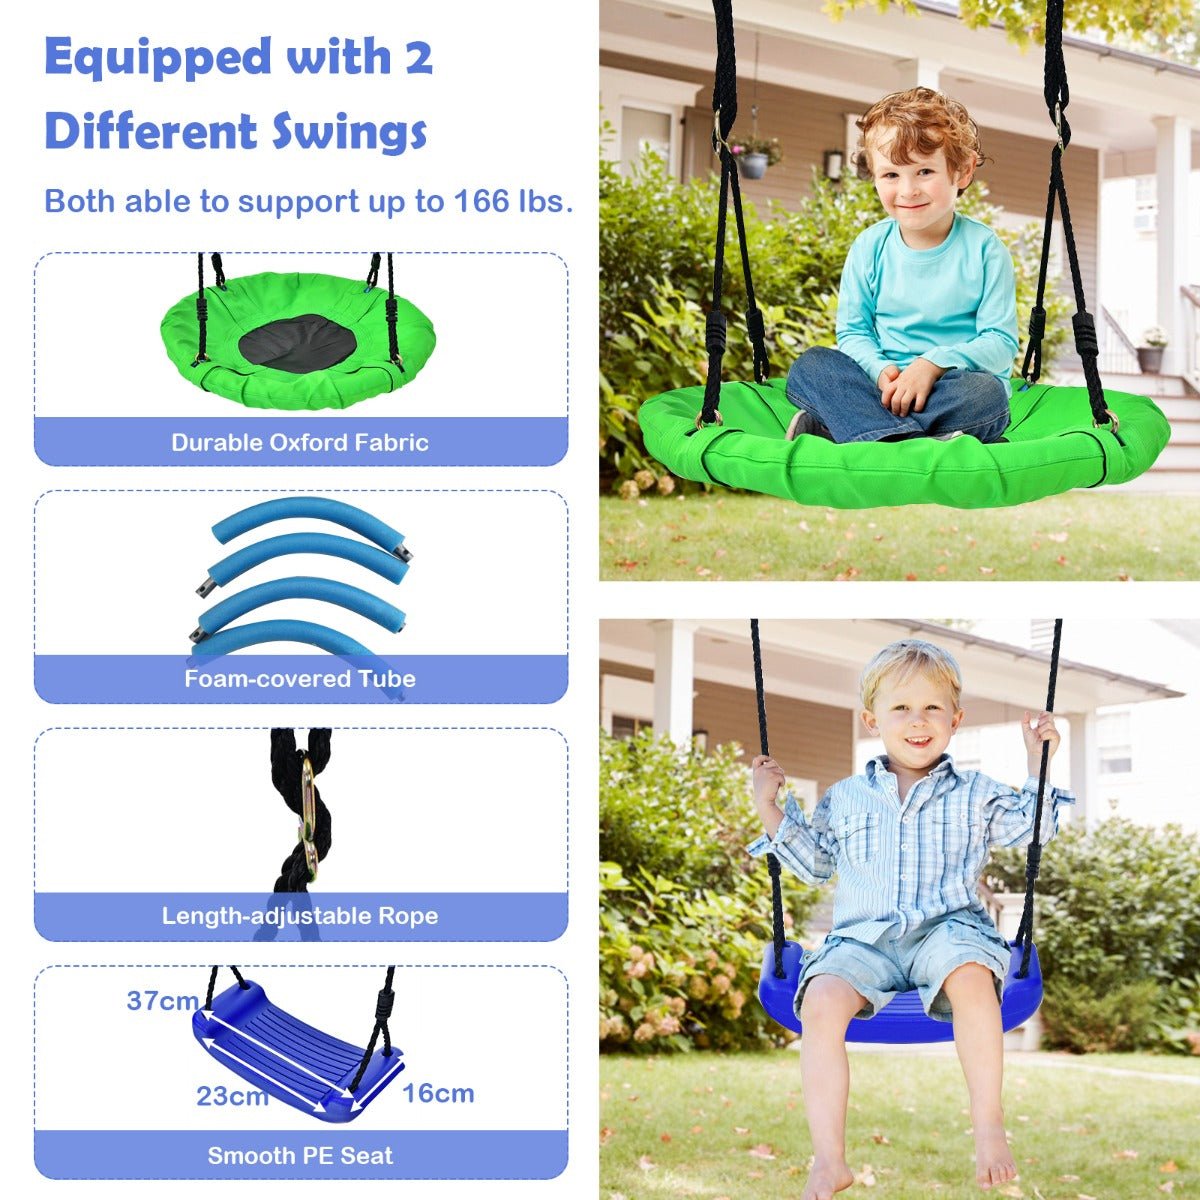 5-in-1 Swing Set: A-Shaped Metal Frame for Exciting Backyard Play